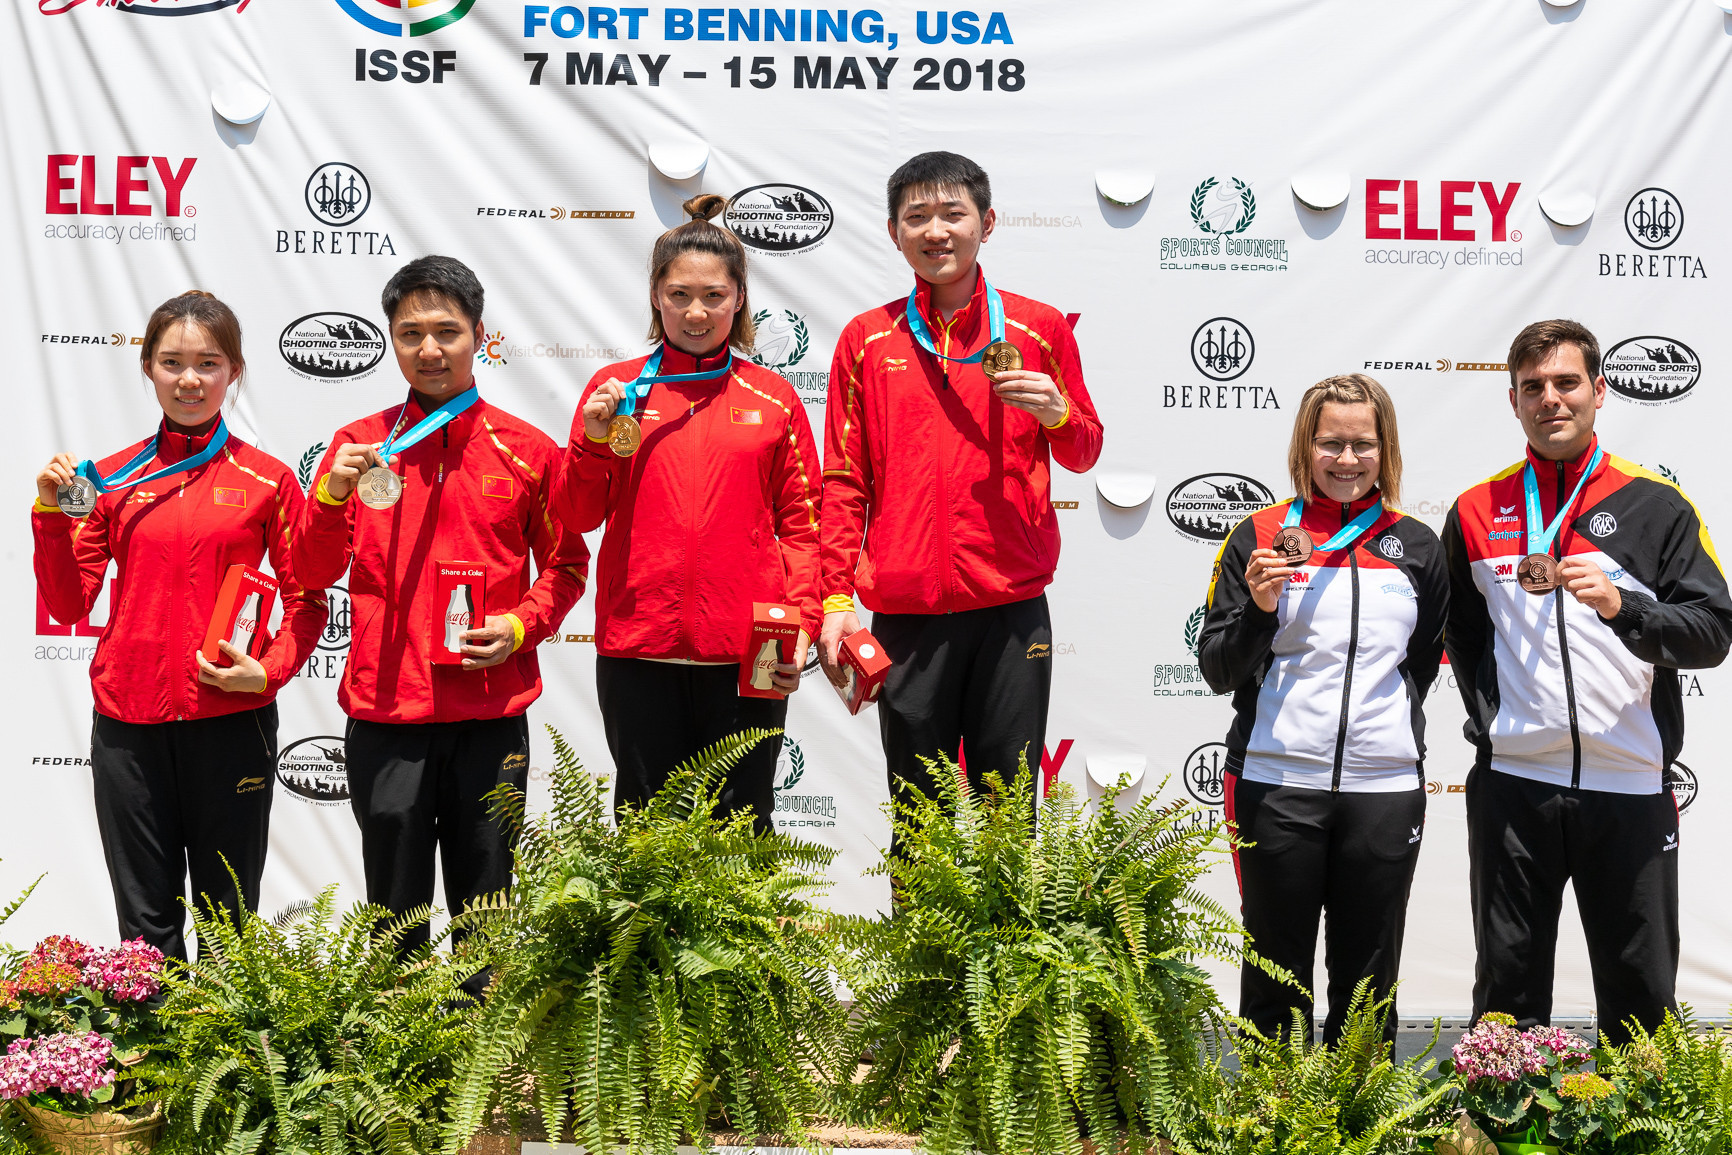 China top medal table at ISSF World Cup in Fort Benning after final day gold